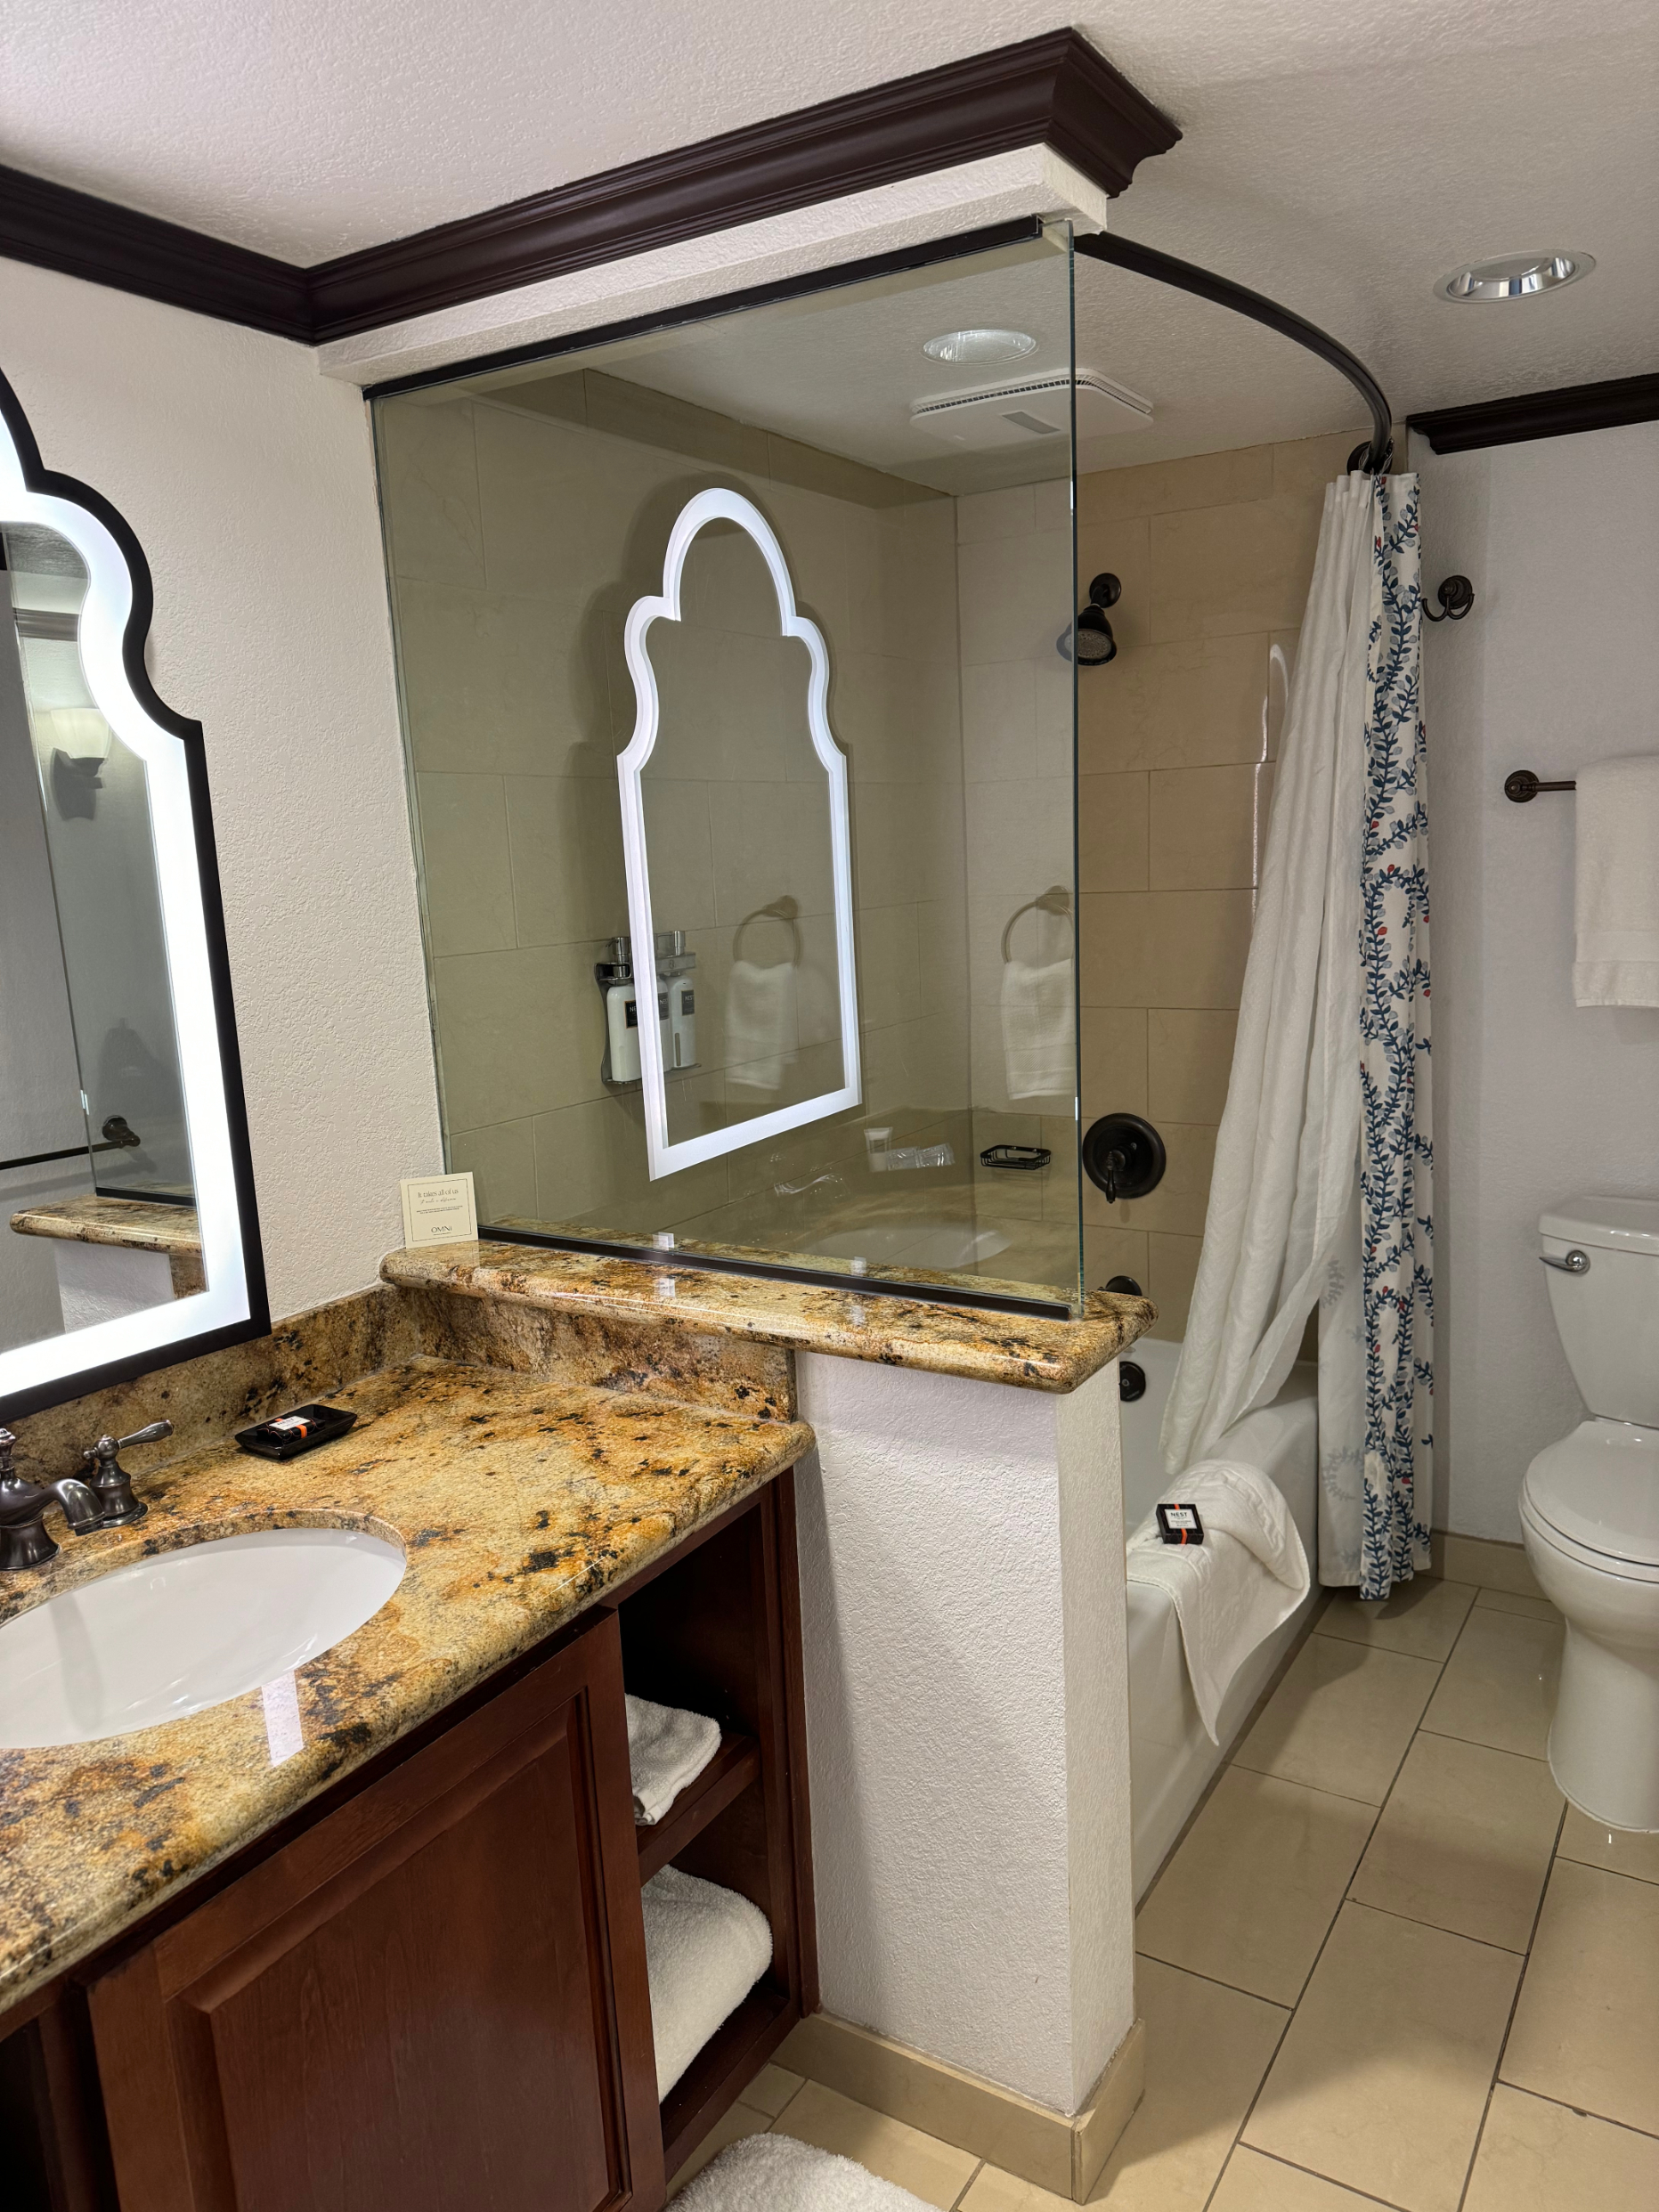 Hotel bathroom with a vanity area, shower stall, and reflective mirror. No people present